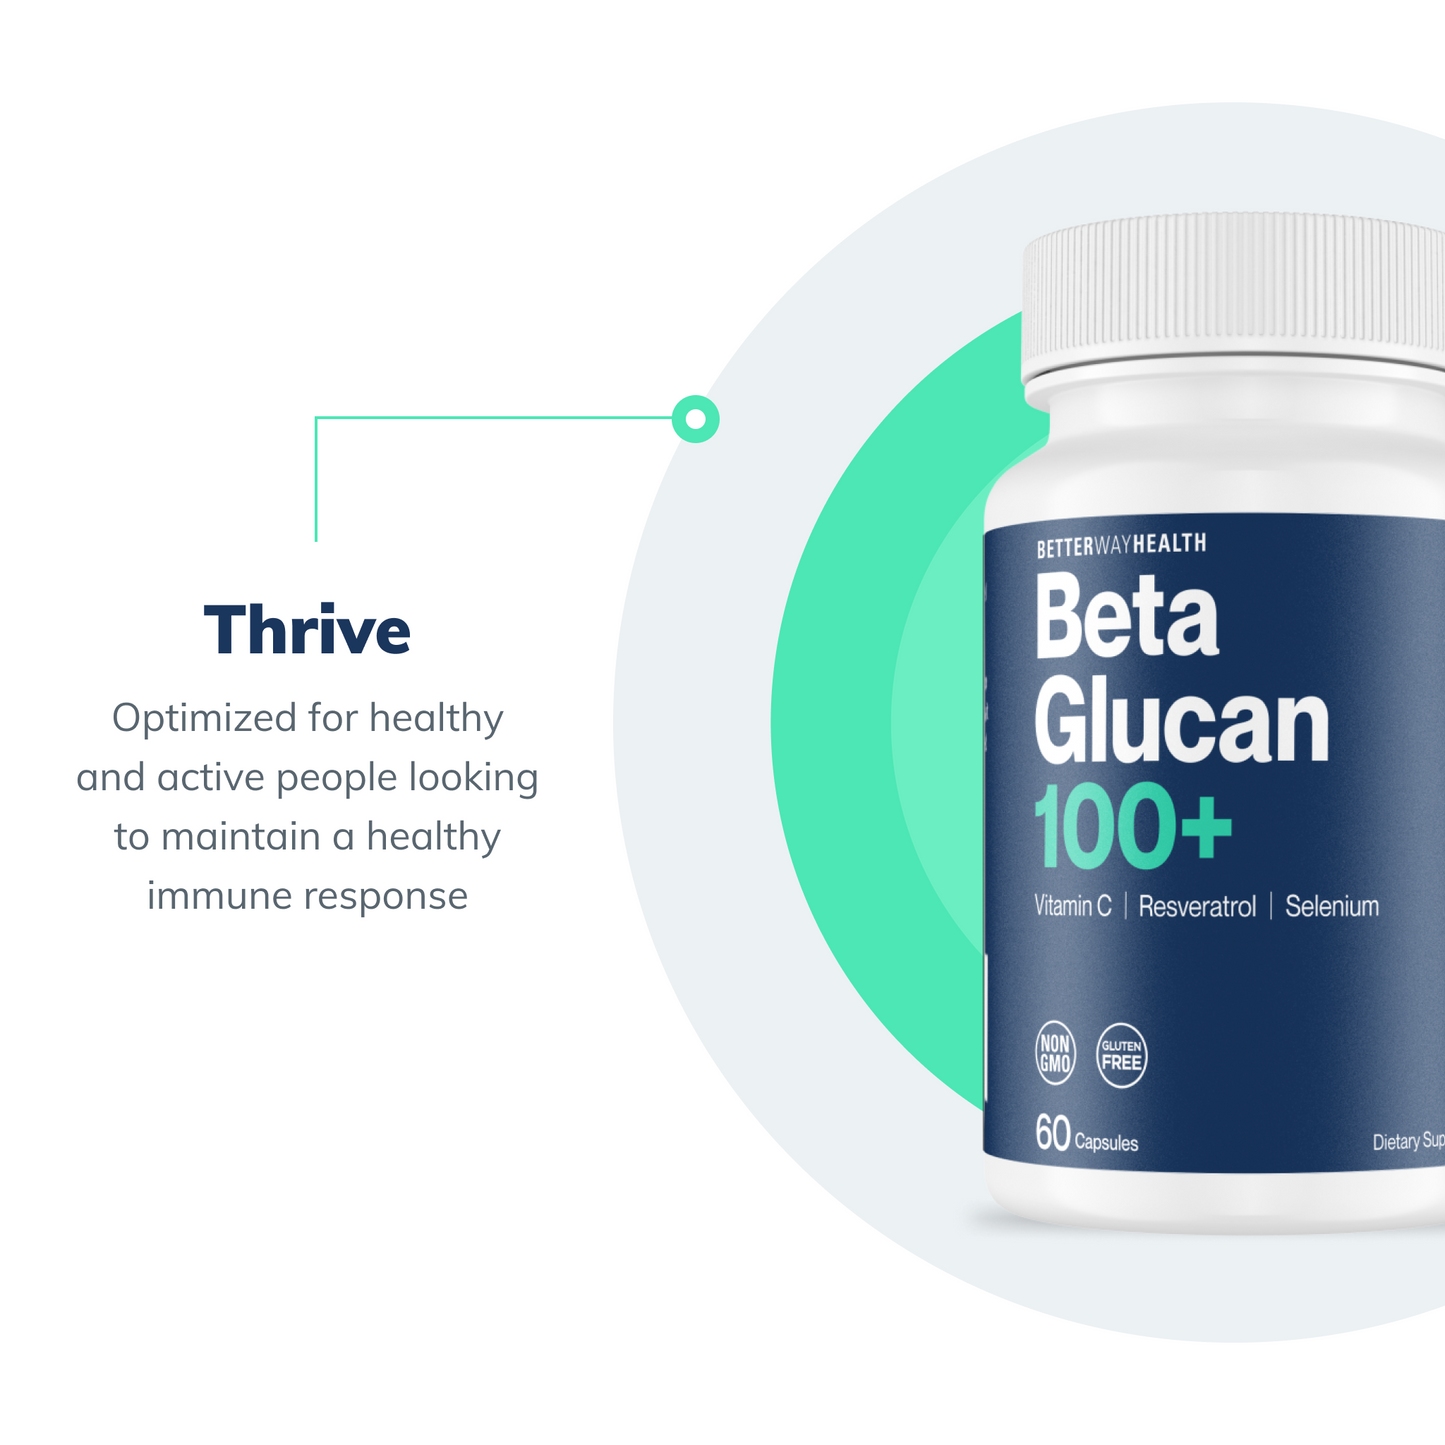 glucan 100+ is optimized for healthy active people